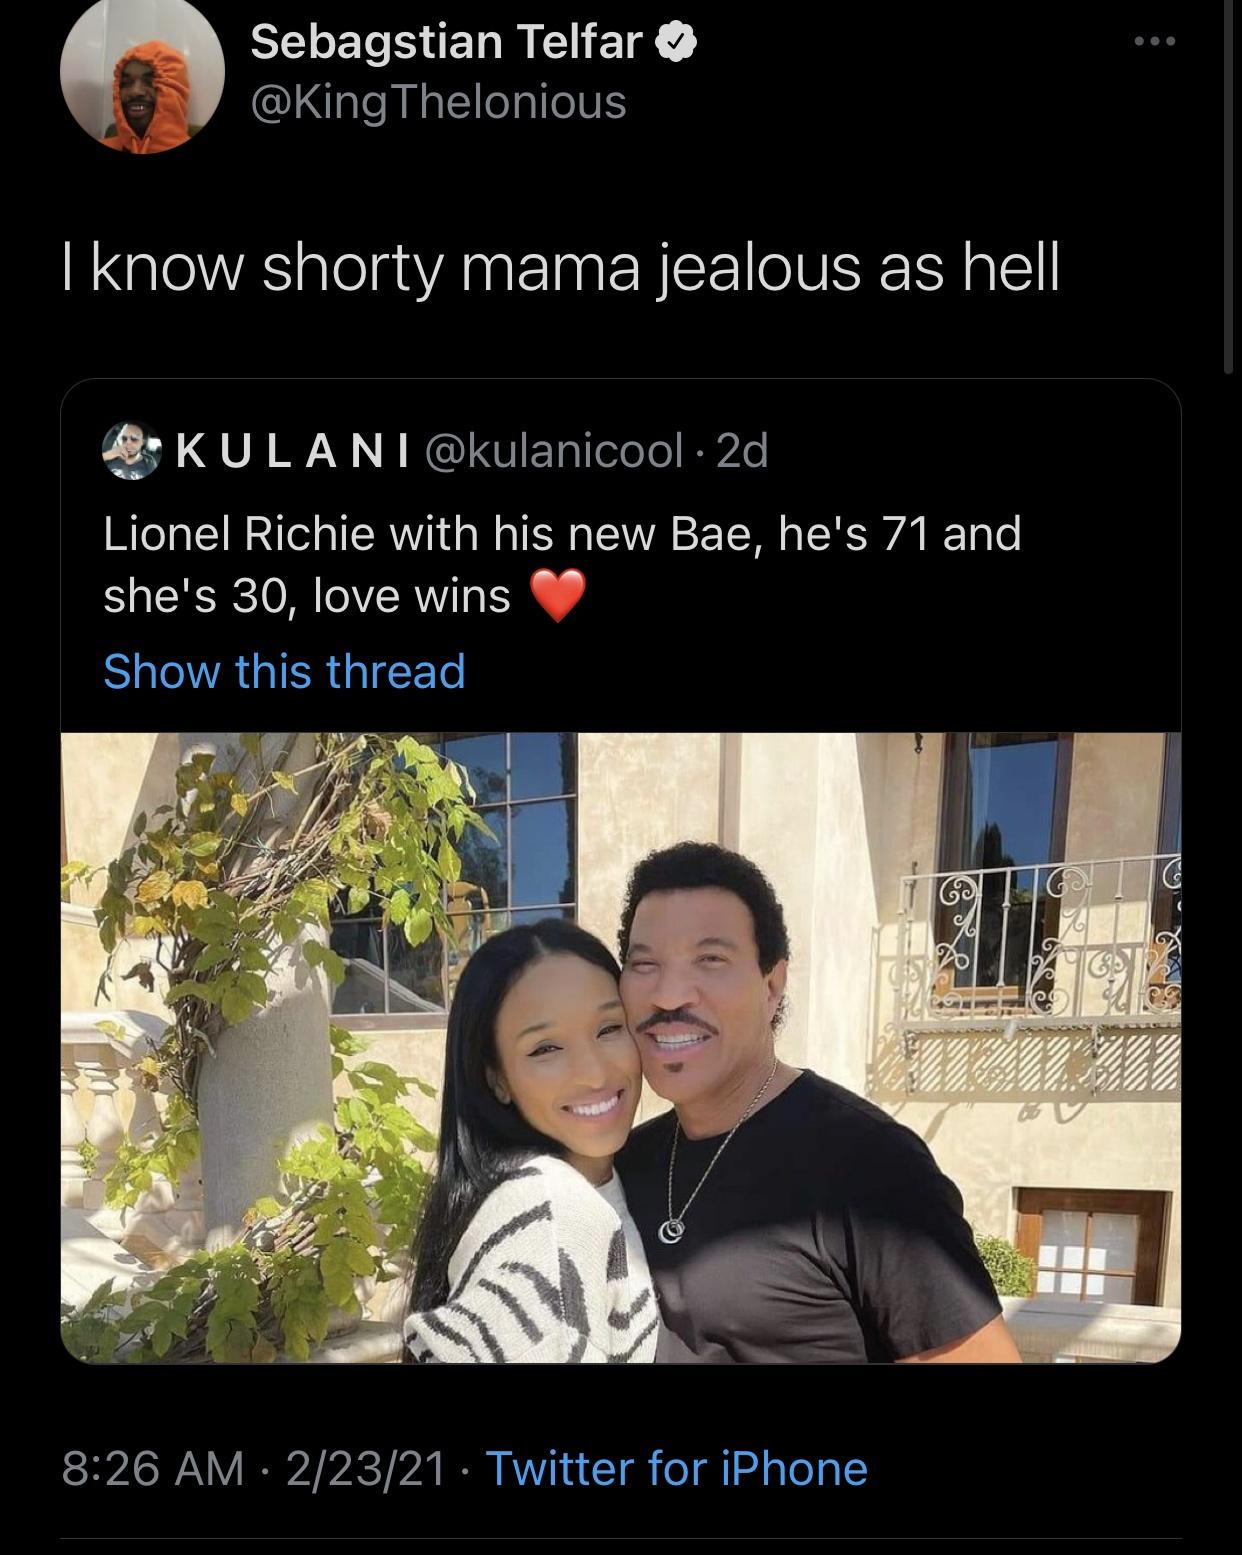 conversation - e Sebagstian Telfar Thelonious I know shorty mama jealous as hell Kulani 2d Lionel Richie with his new Bae, he's 71 and she's 30, love wins Show this thread C 22321 Twitter for iPhone